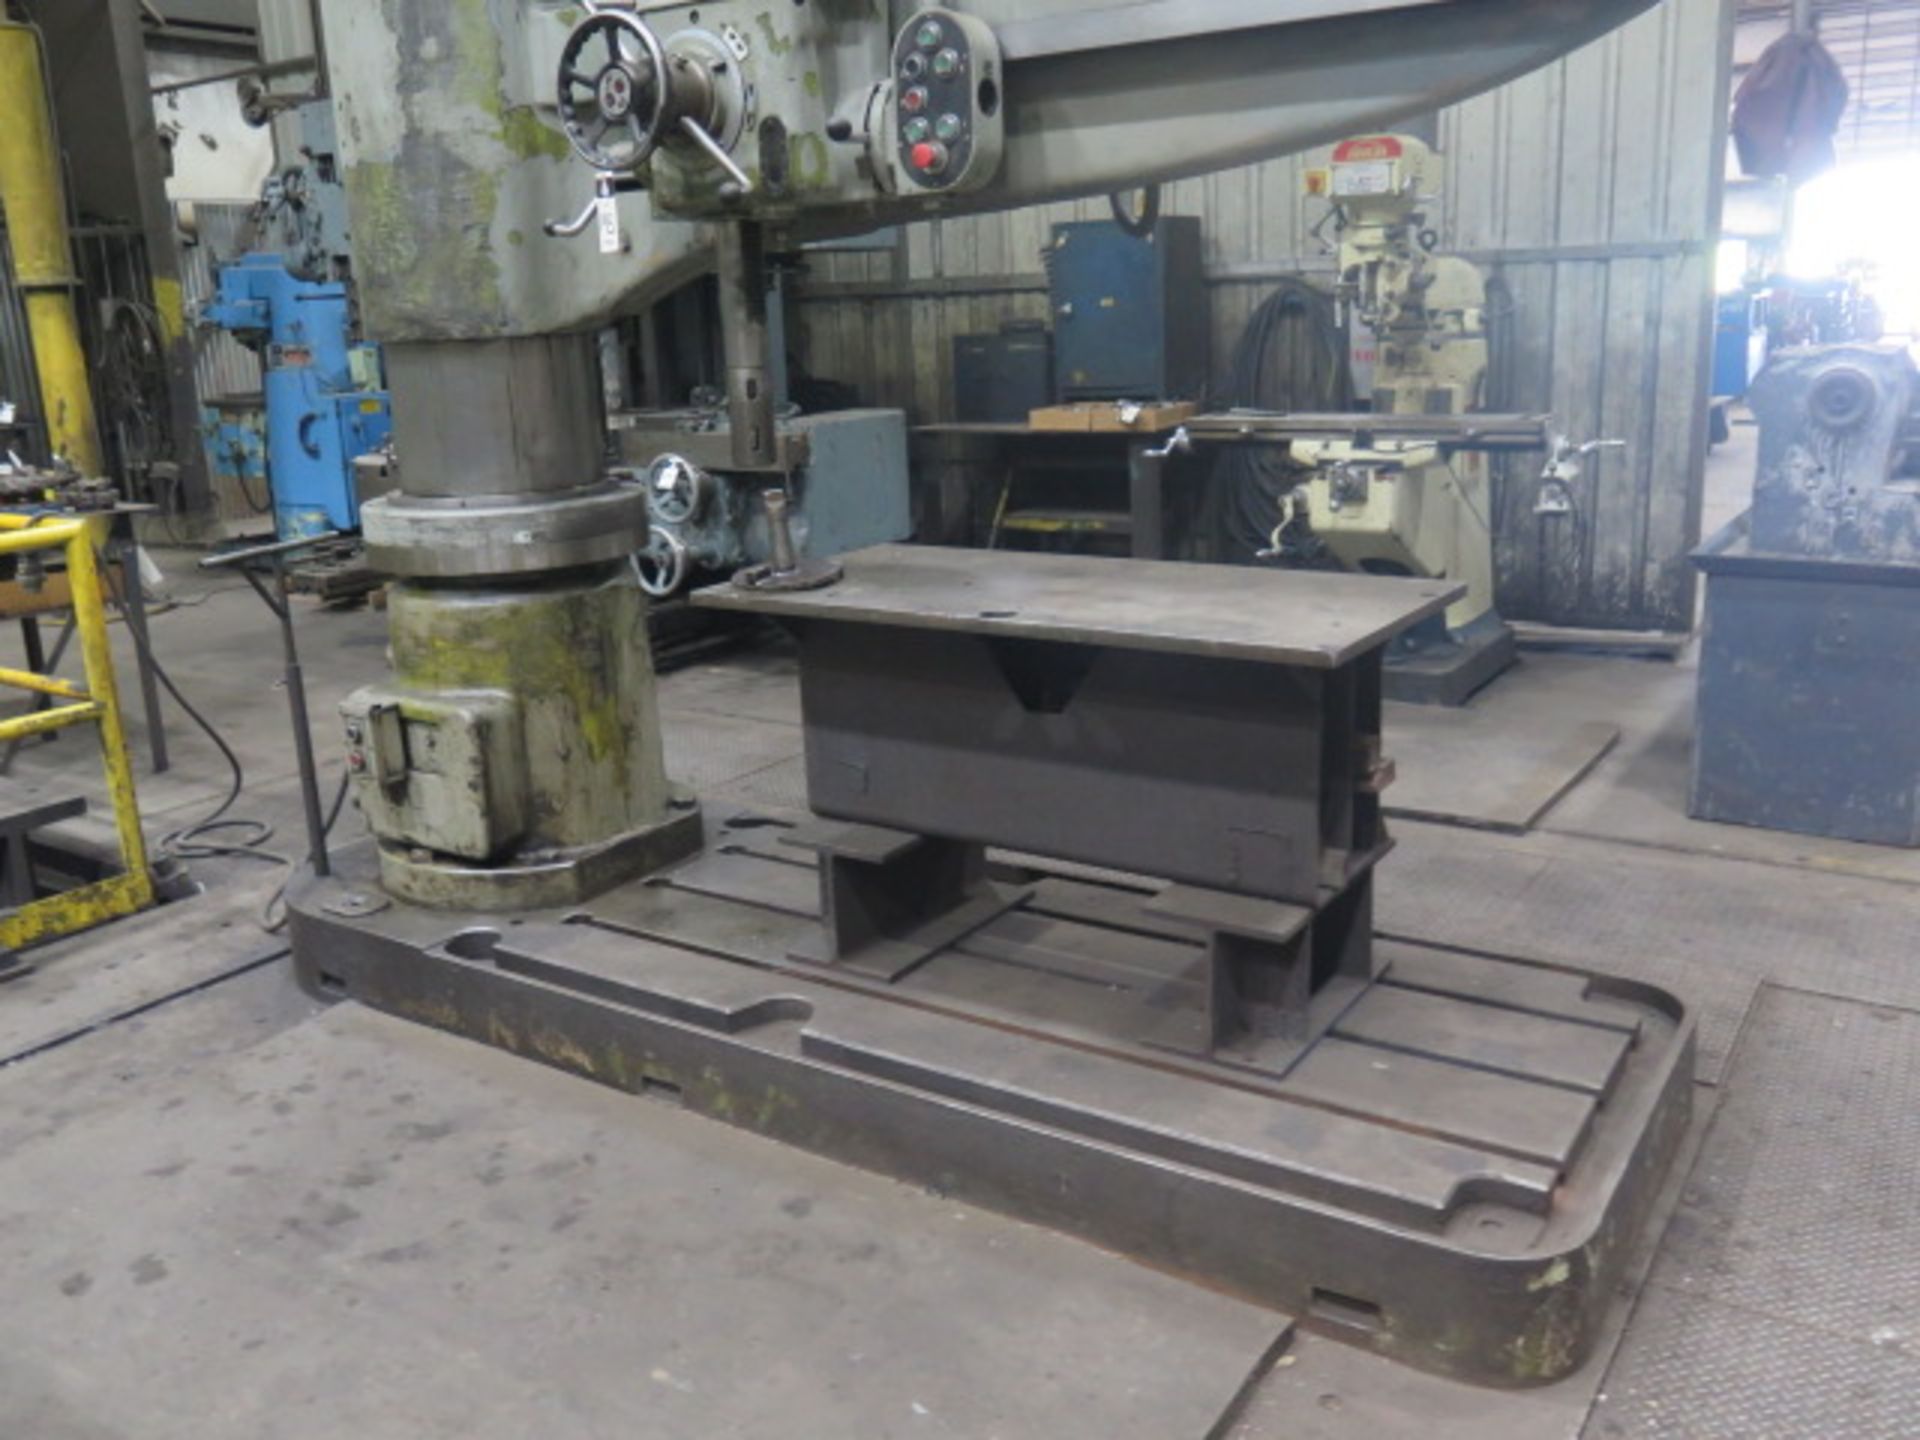 Polamco 17” Column x 60” Radial Arm Drill w/ 30-1700 RPM, Power Column and Feeds - Image 3 of 8